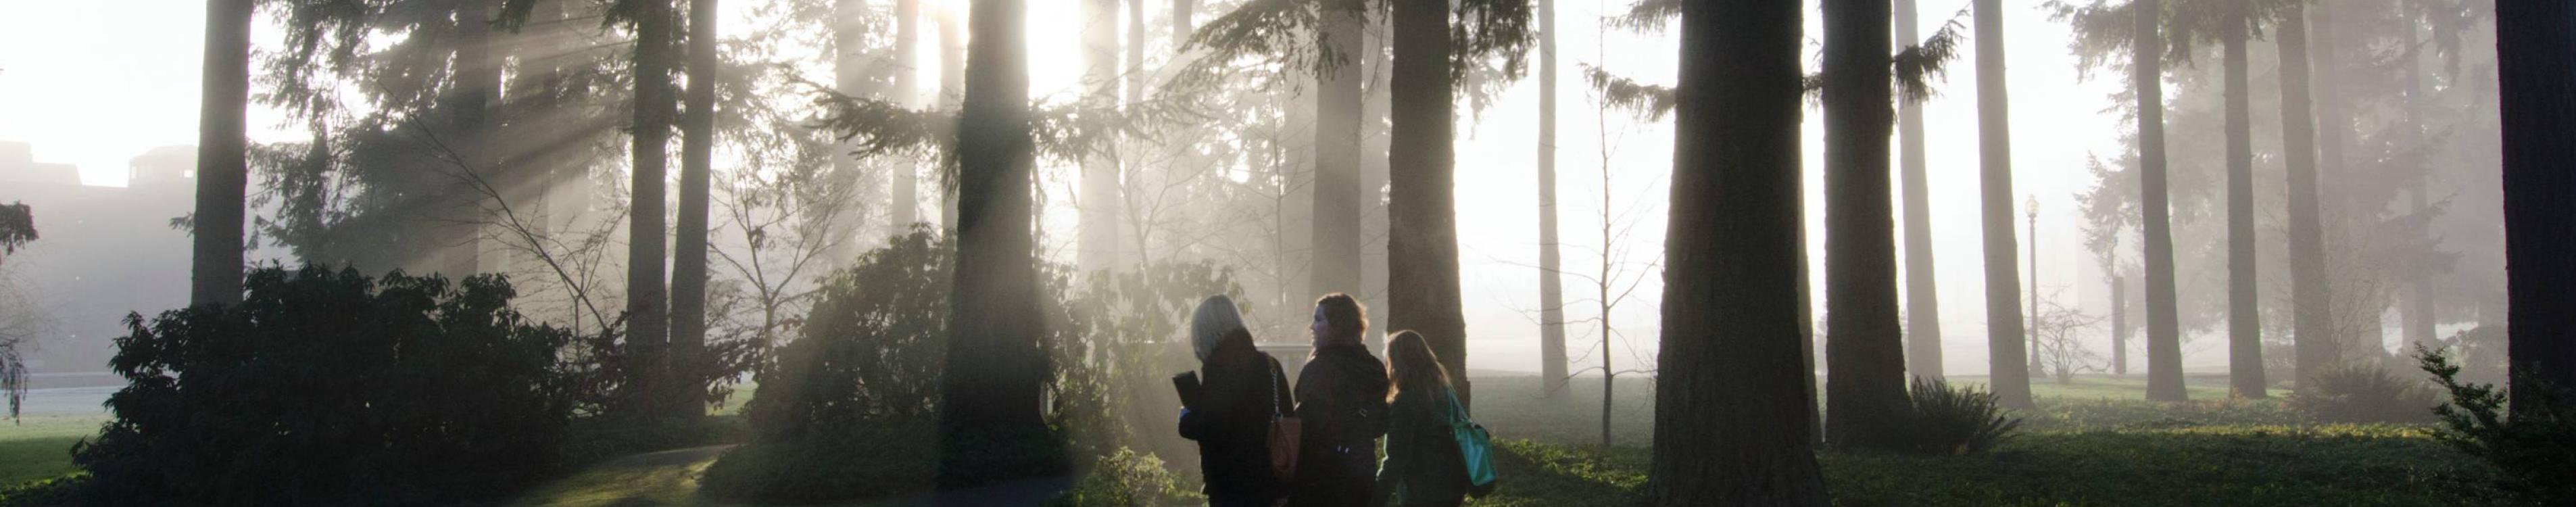 Students walk through the arboretum on a sunny and foggy morning on campus.